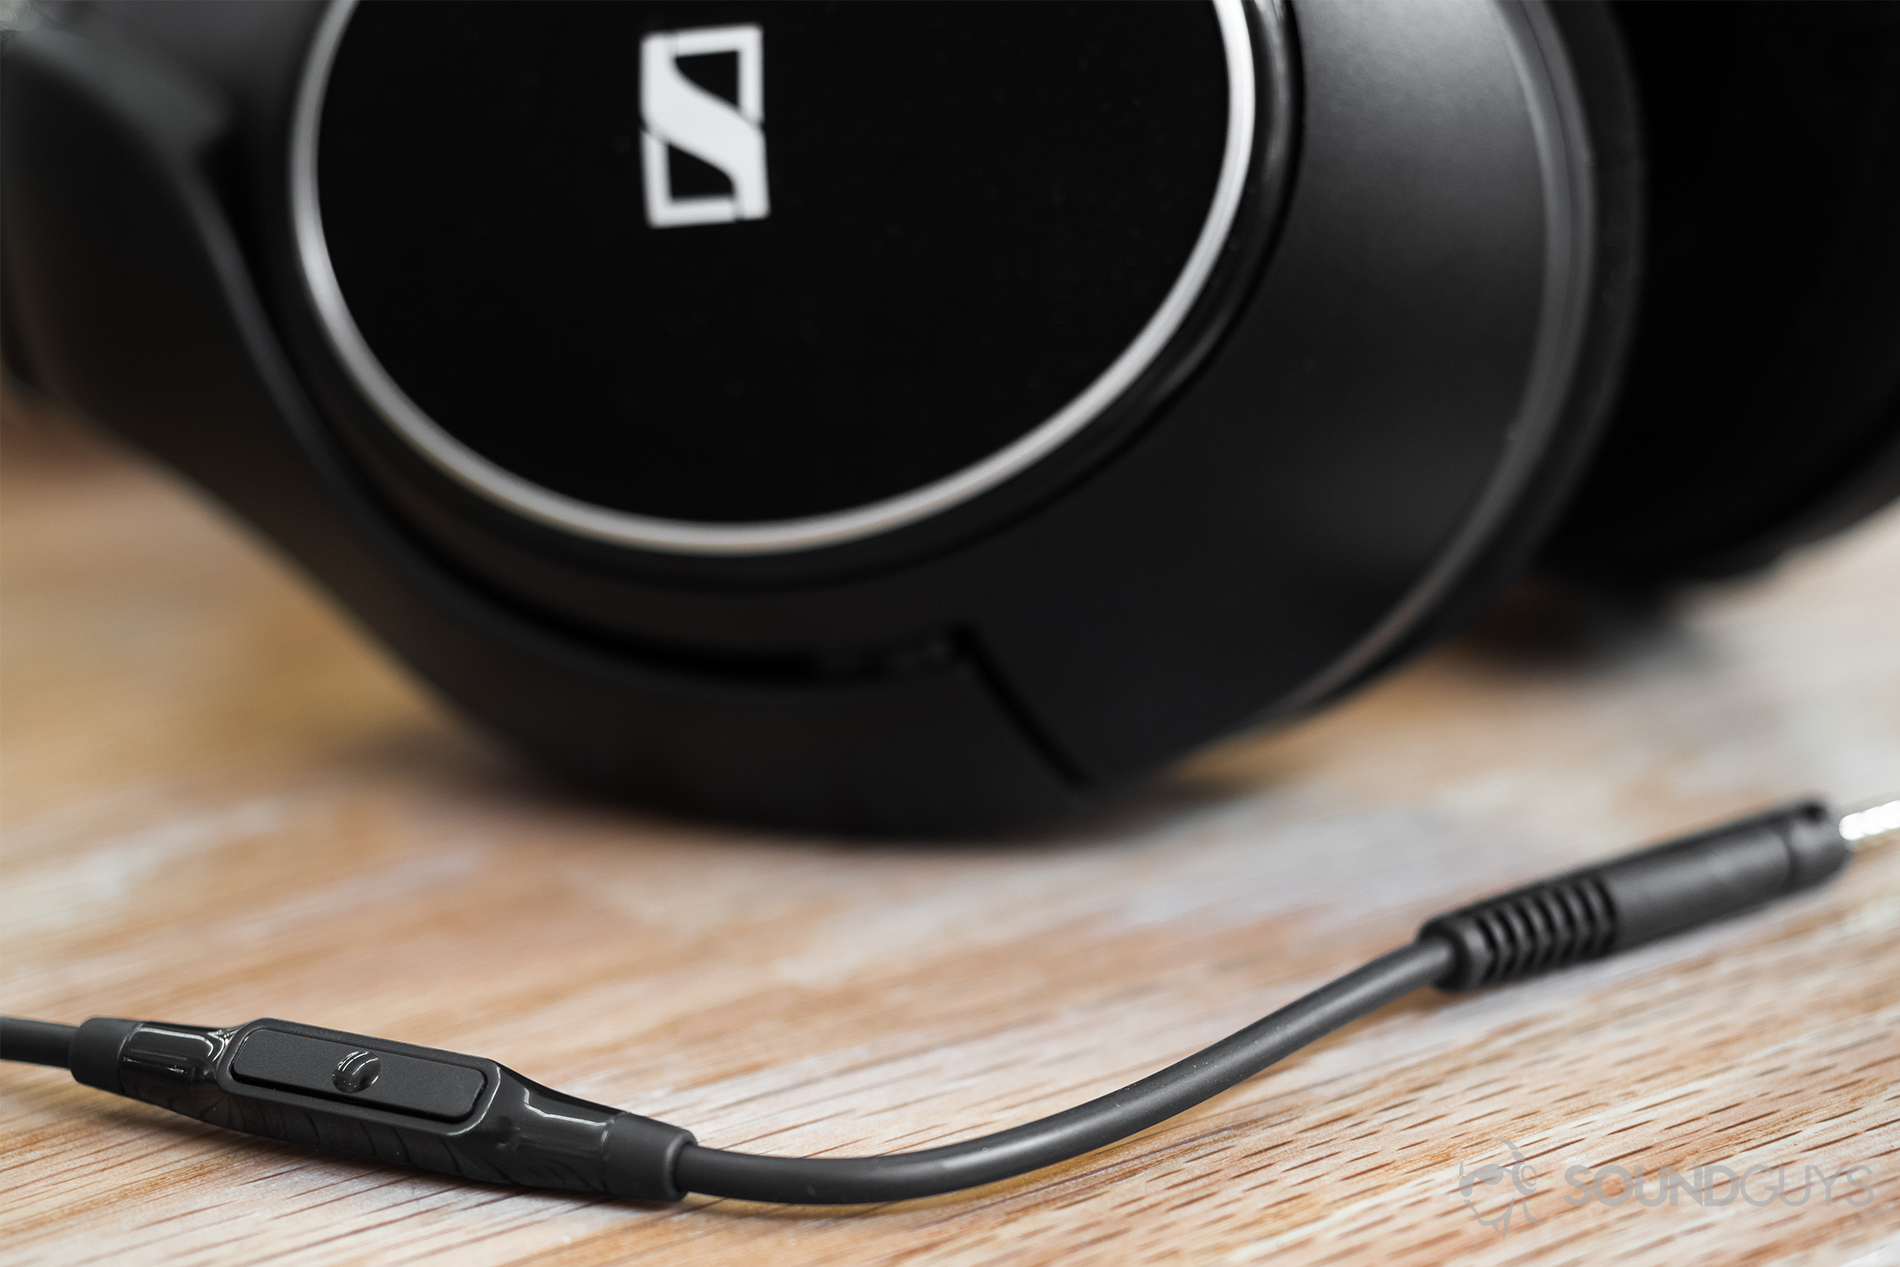 Sennheiser HD 598 CS review: Close up of the headphones and the multi-function button.